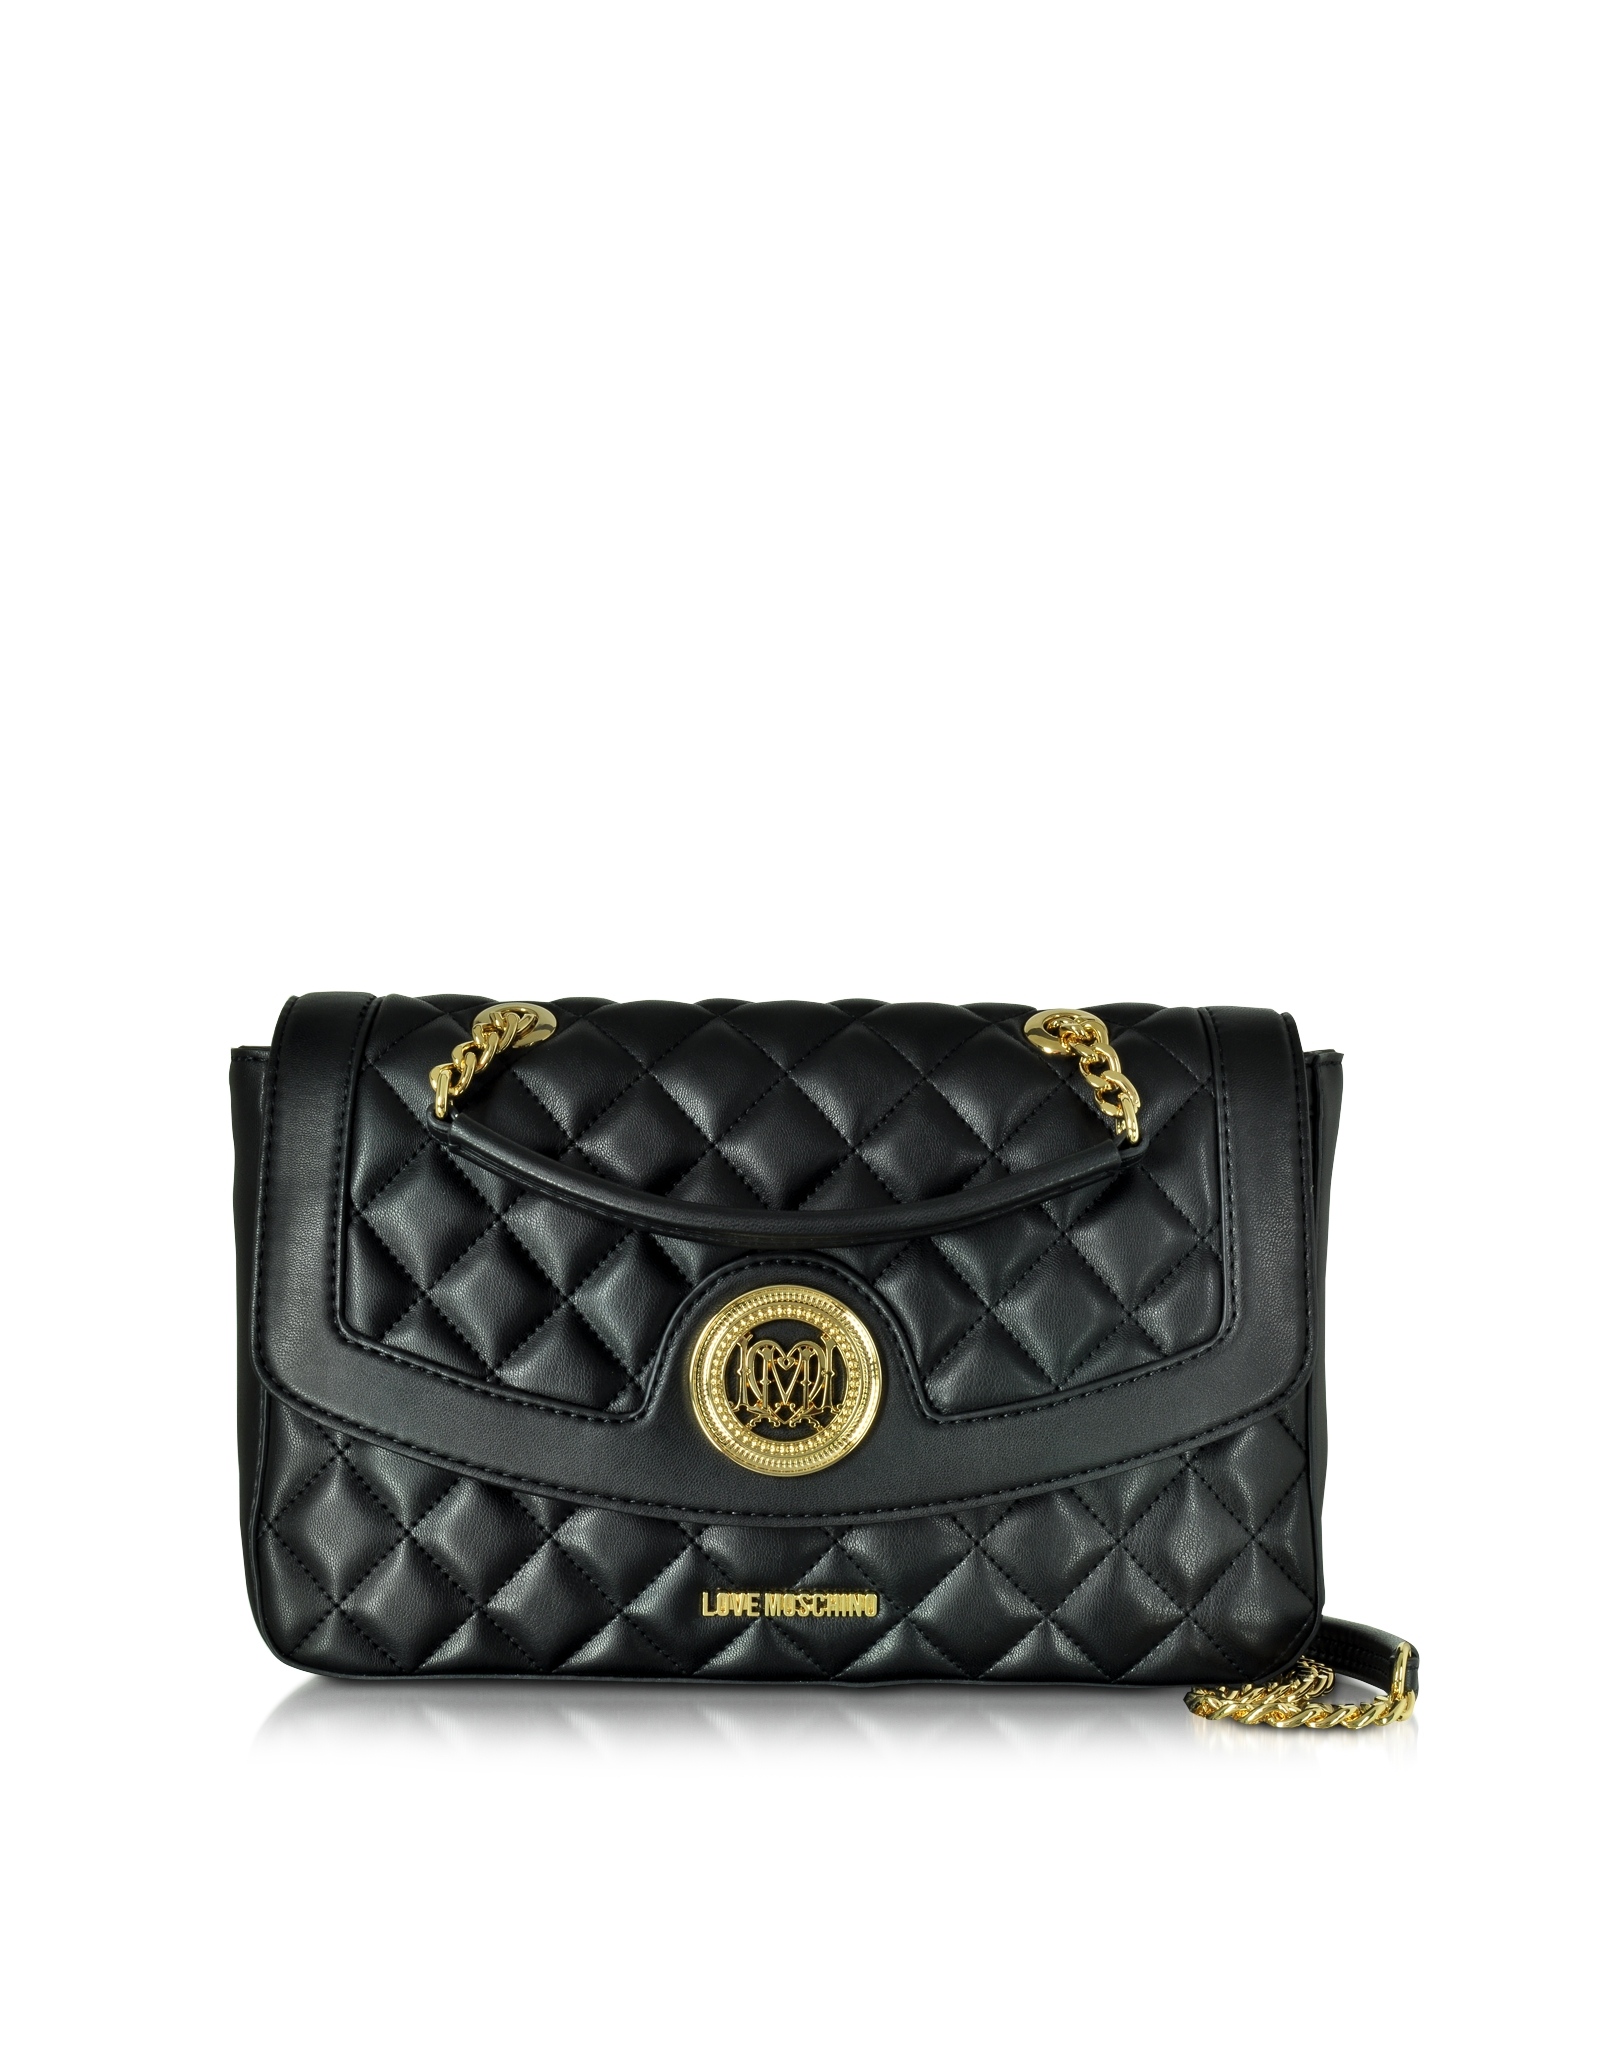 Love moschino Black Quilted Eco Leather Shoulder Bag W/chain Straps in Black | Lyst